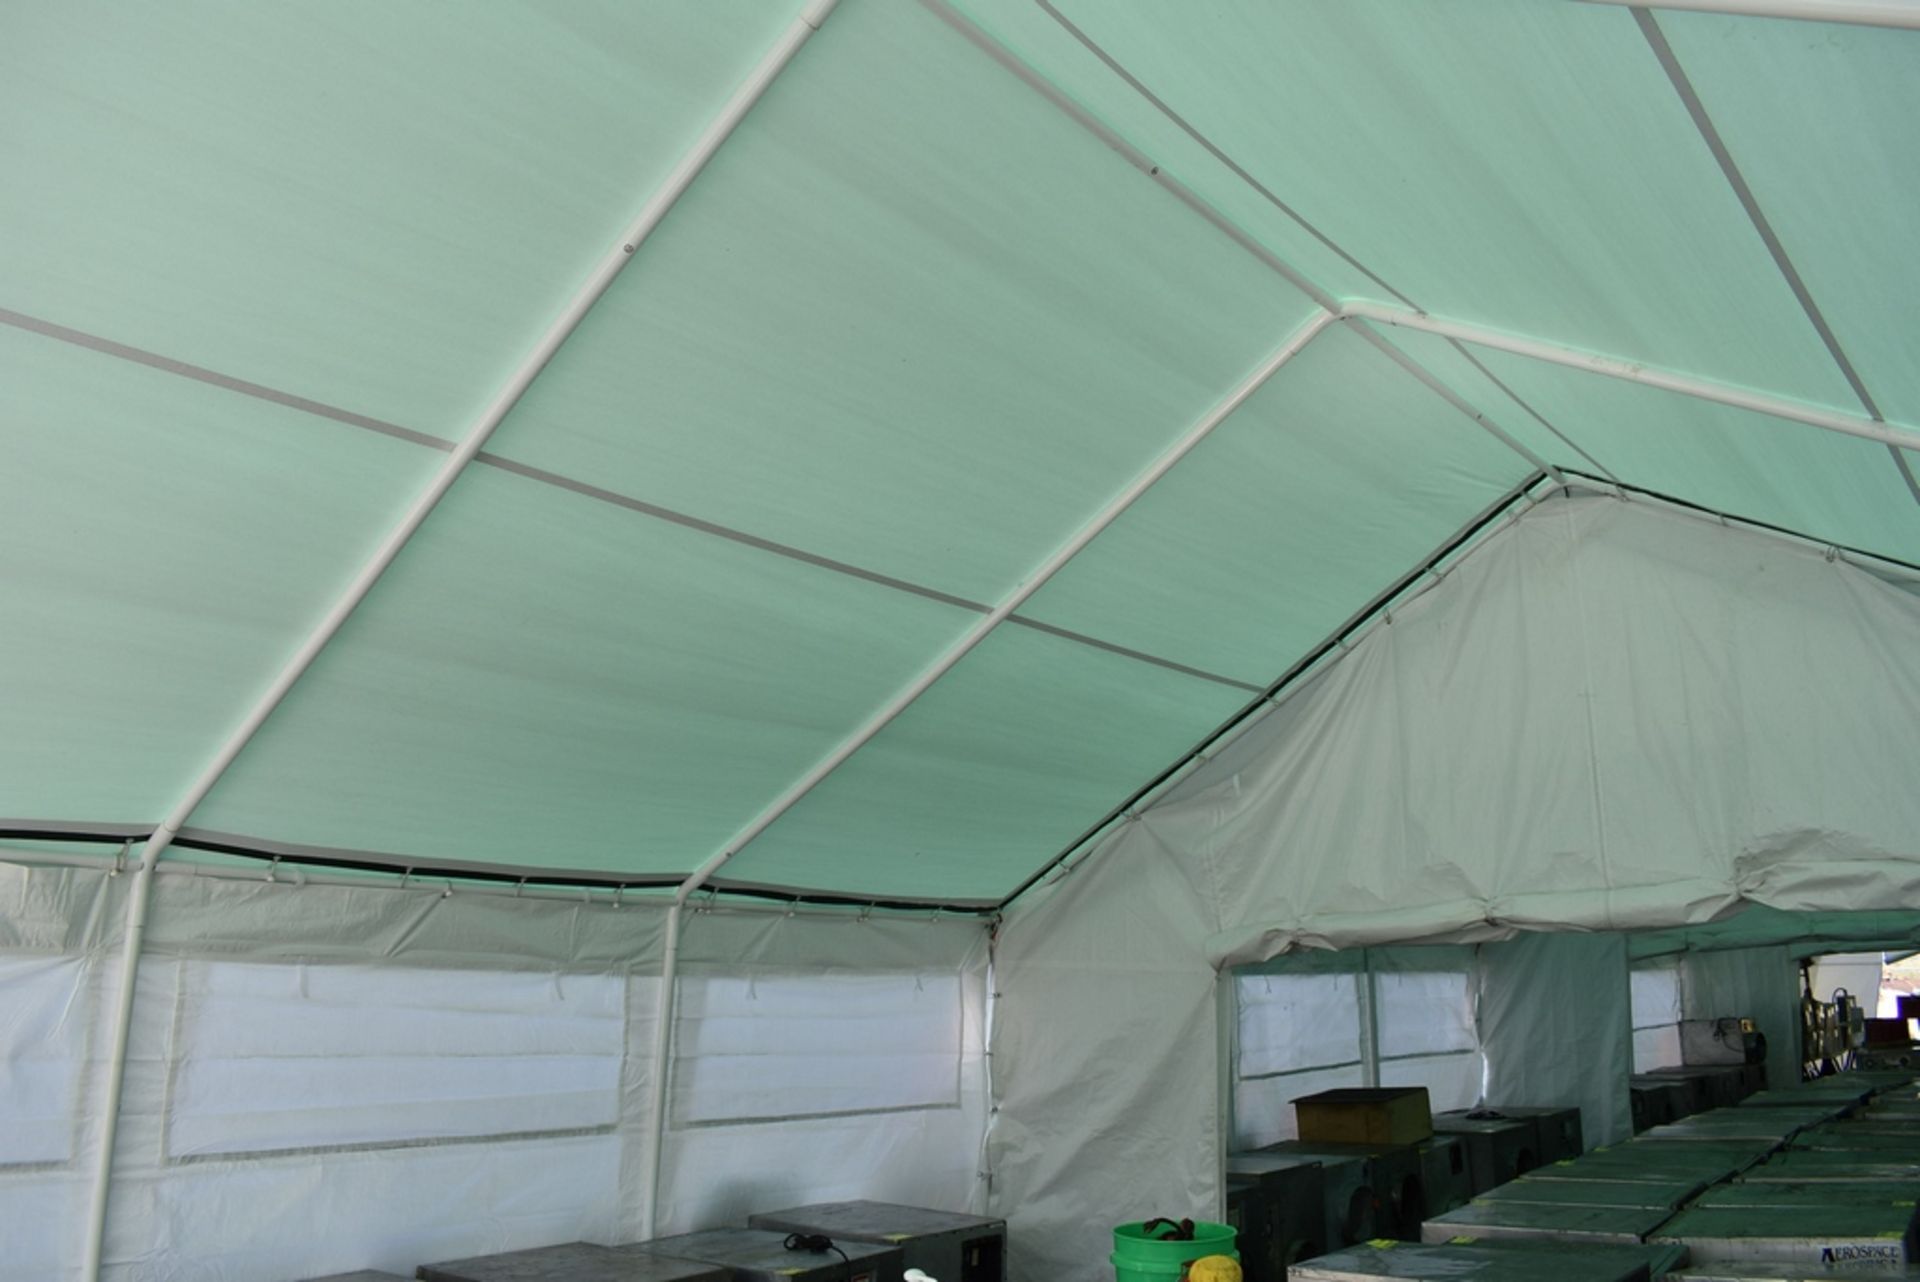 WEATHER FAST 20'X20'X12' EVENT TENTS W/FULL VALANCE FITTED COVER, 8 FOOT PLATES, 2" DIA. STEEL - Image 2 of 2